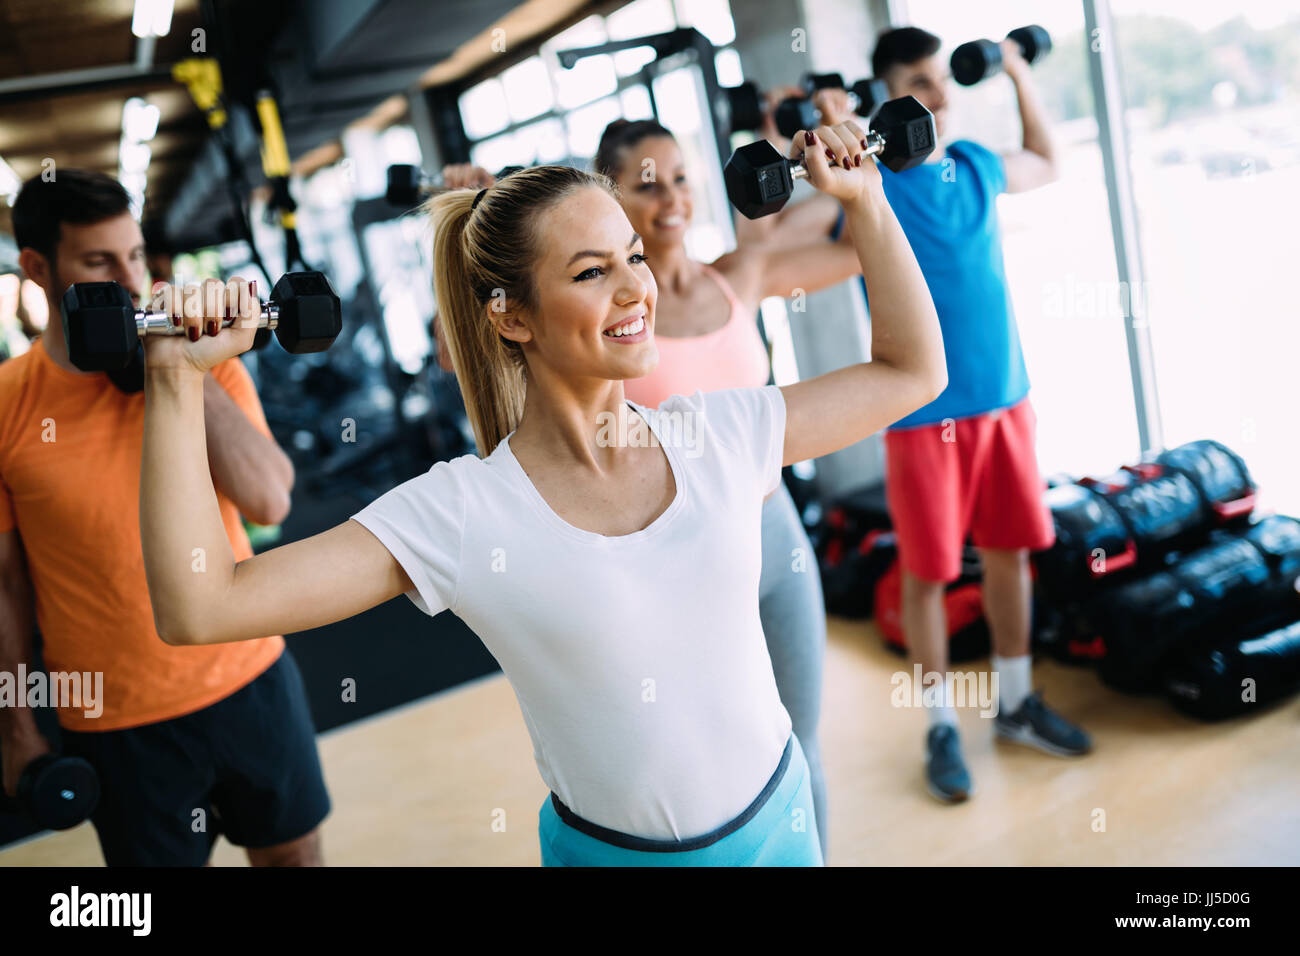 Group of people training together in gym Stock Photo